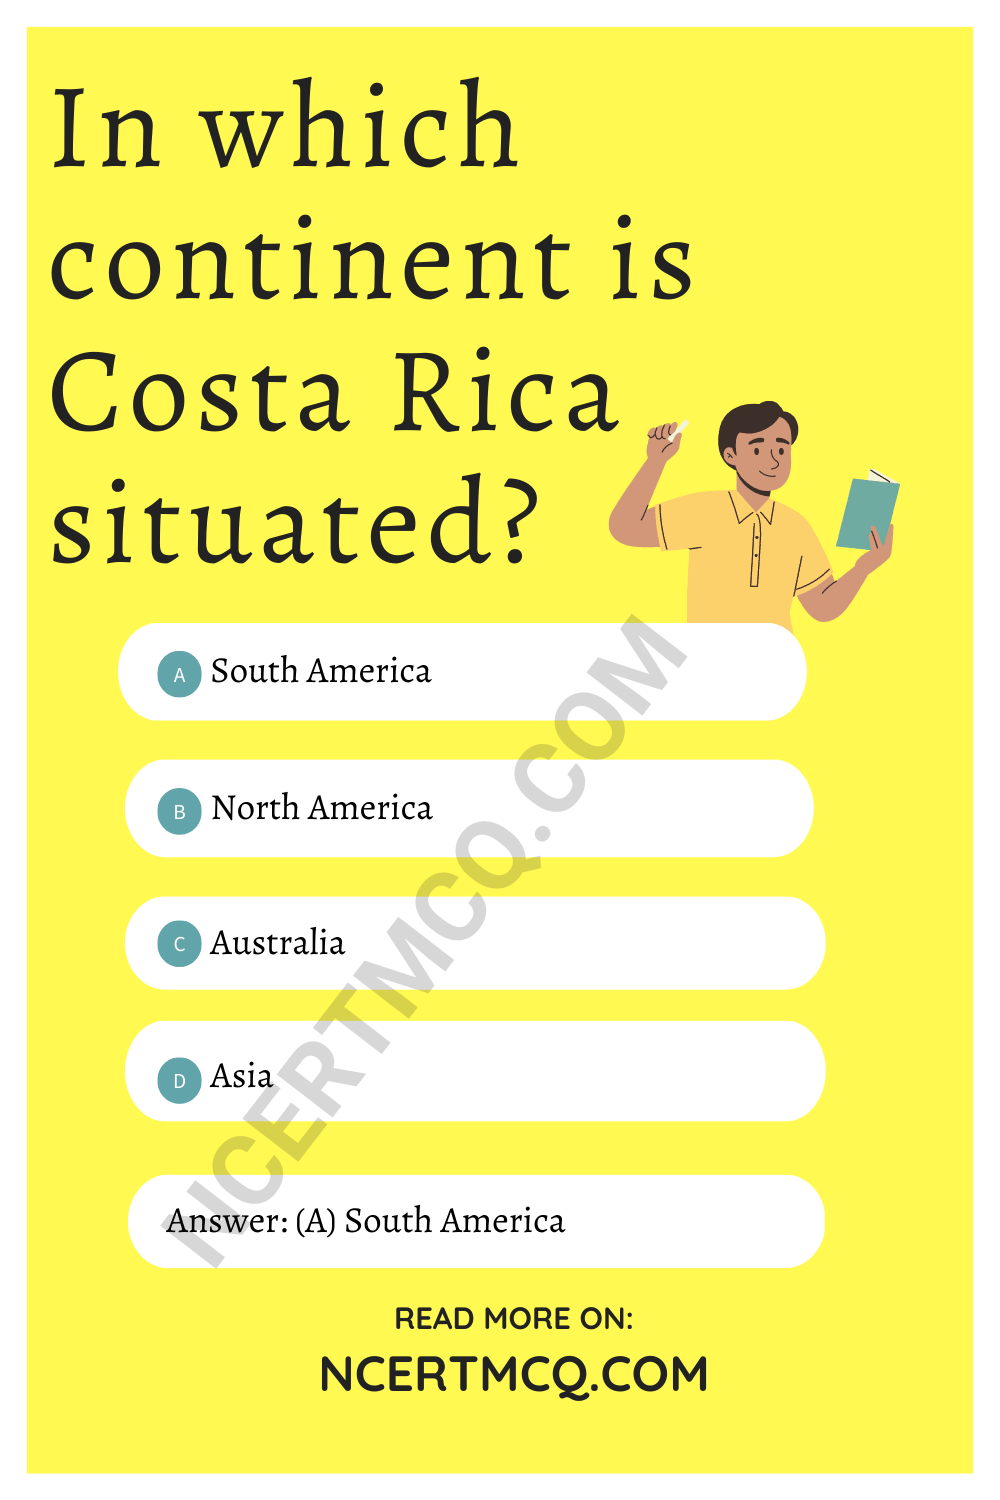 In which continent is Costa Rica situated?